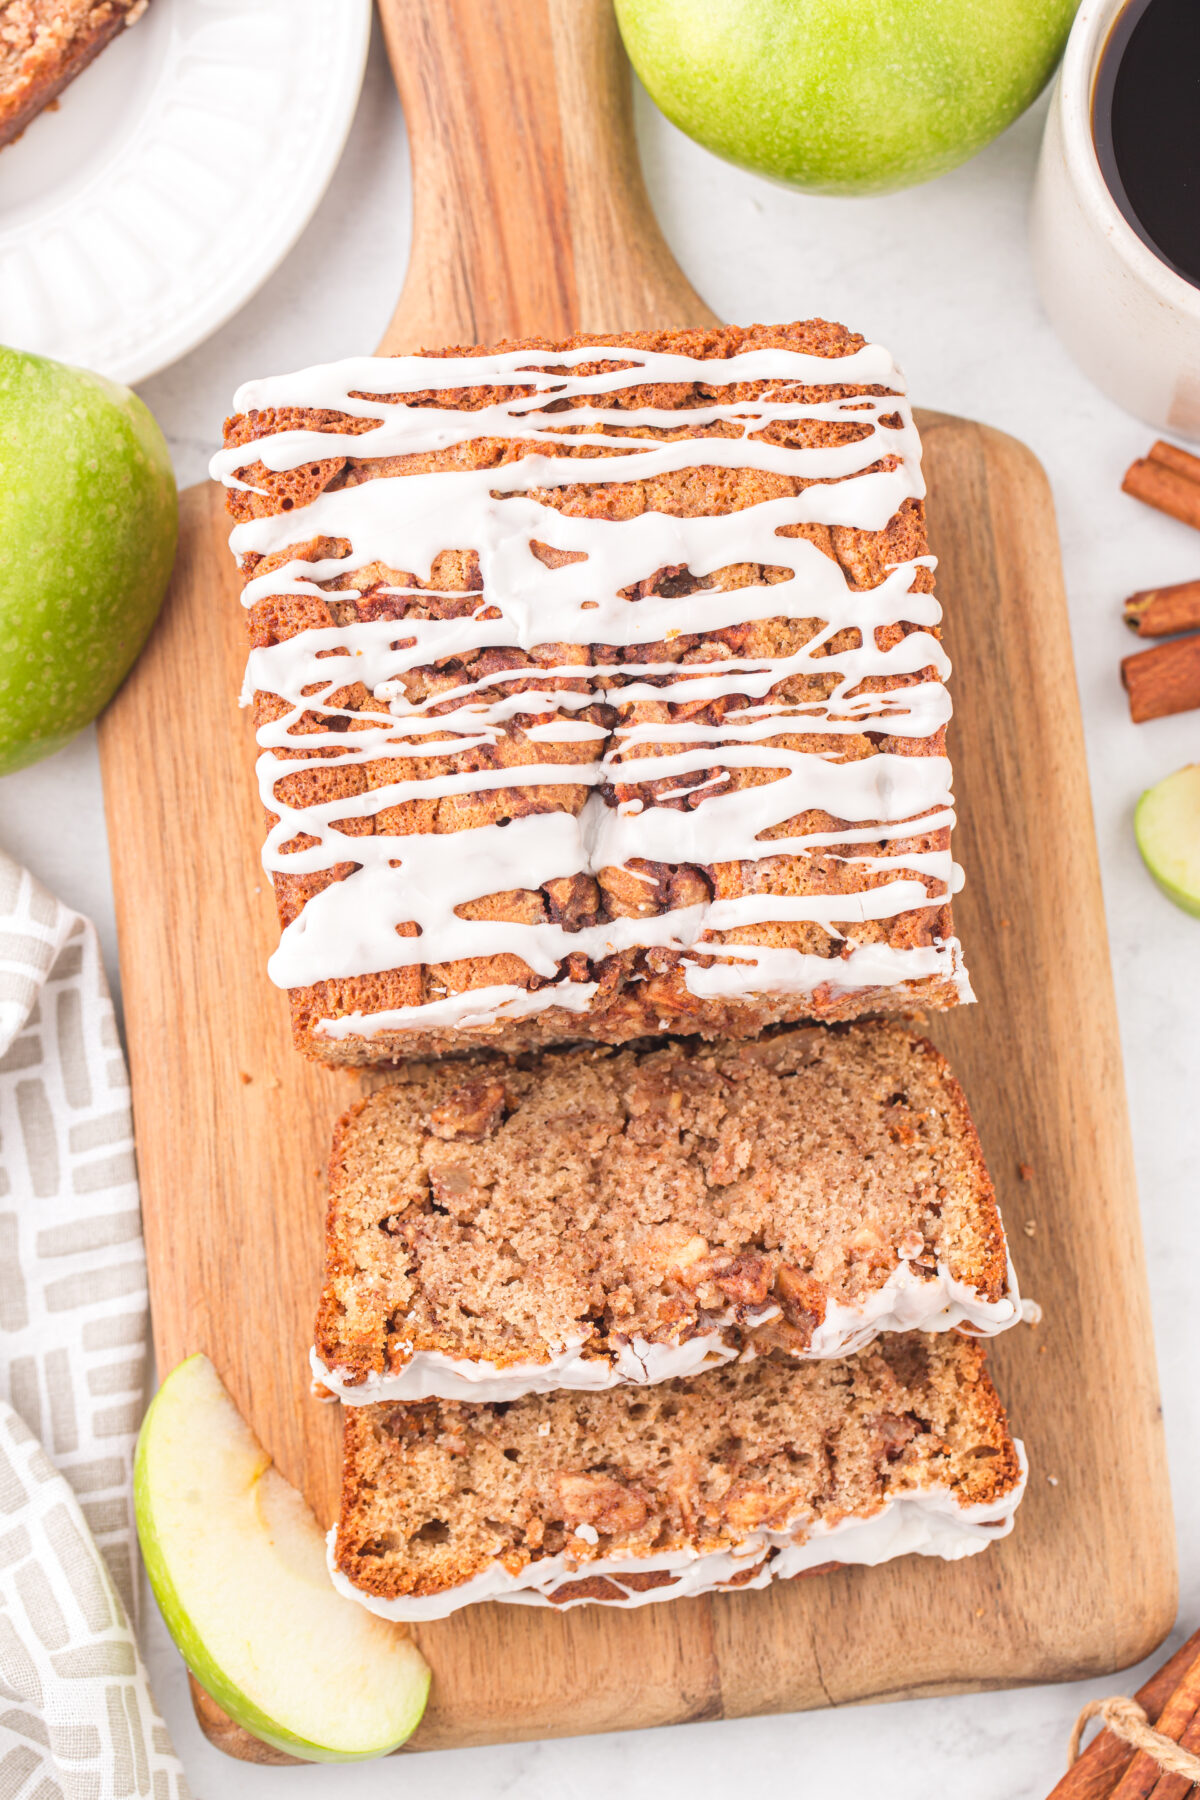 Nothing beats the smell of freshly baked homemade apple cinnamon bread. It's so good, you won't be able to stop at just one slice!